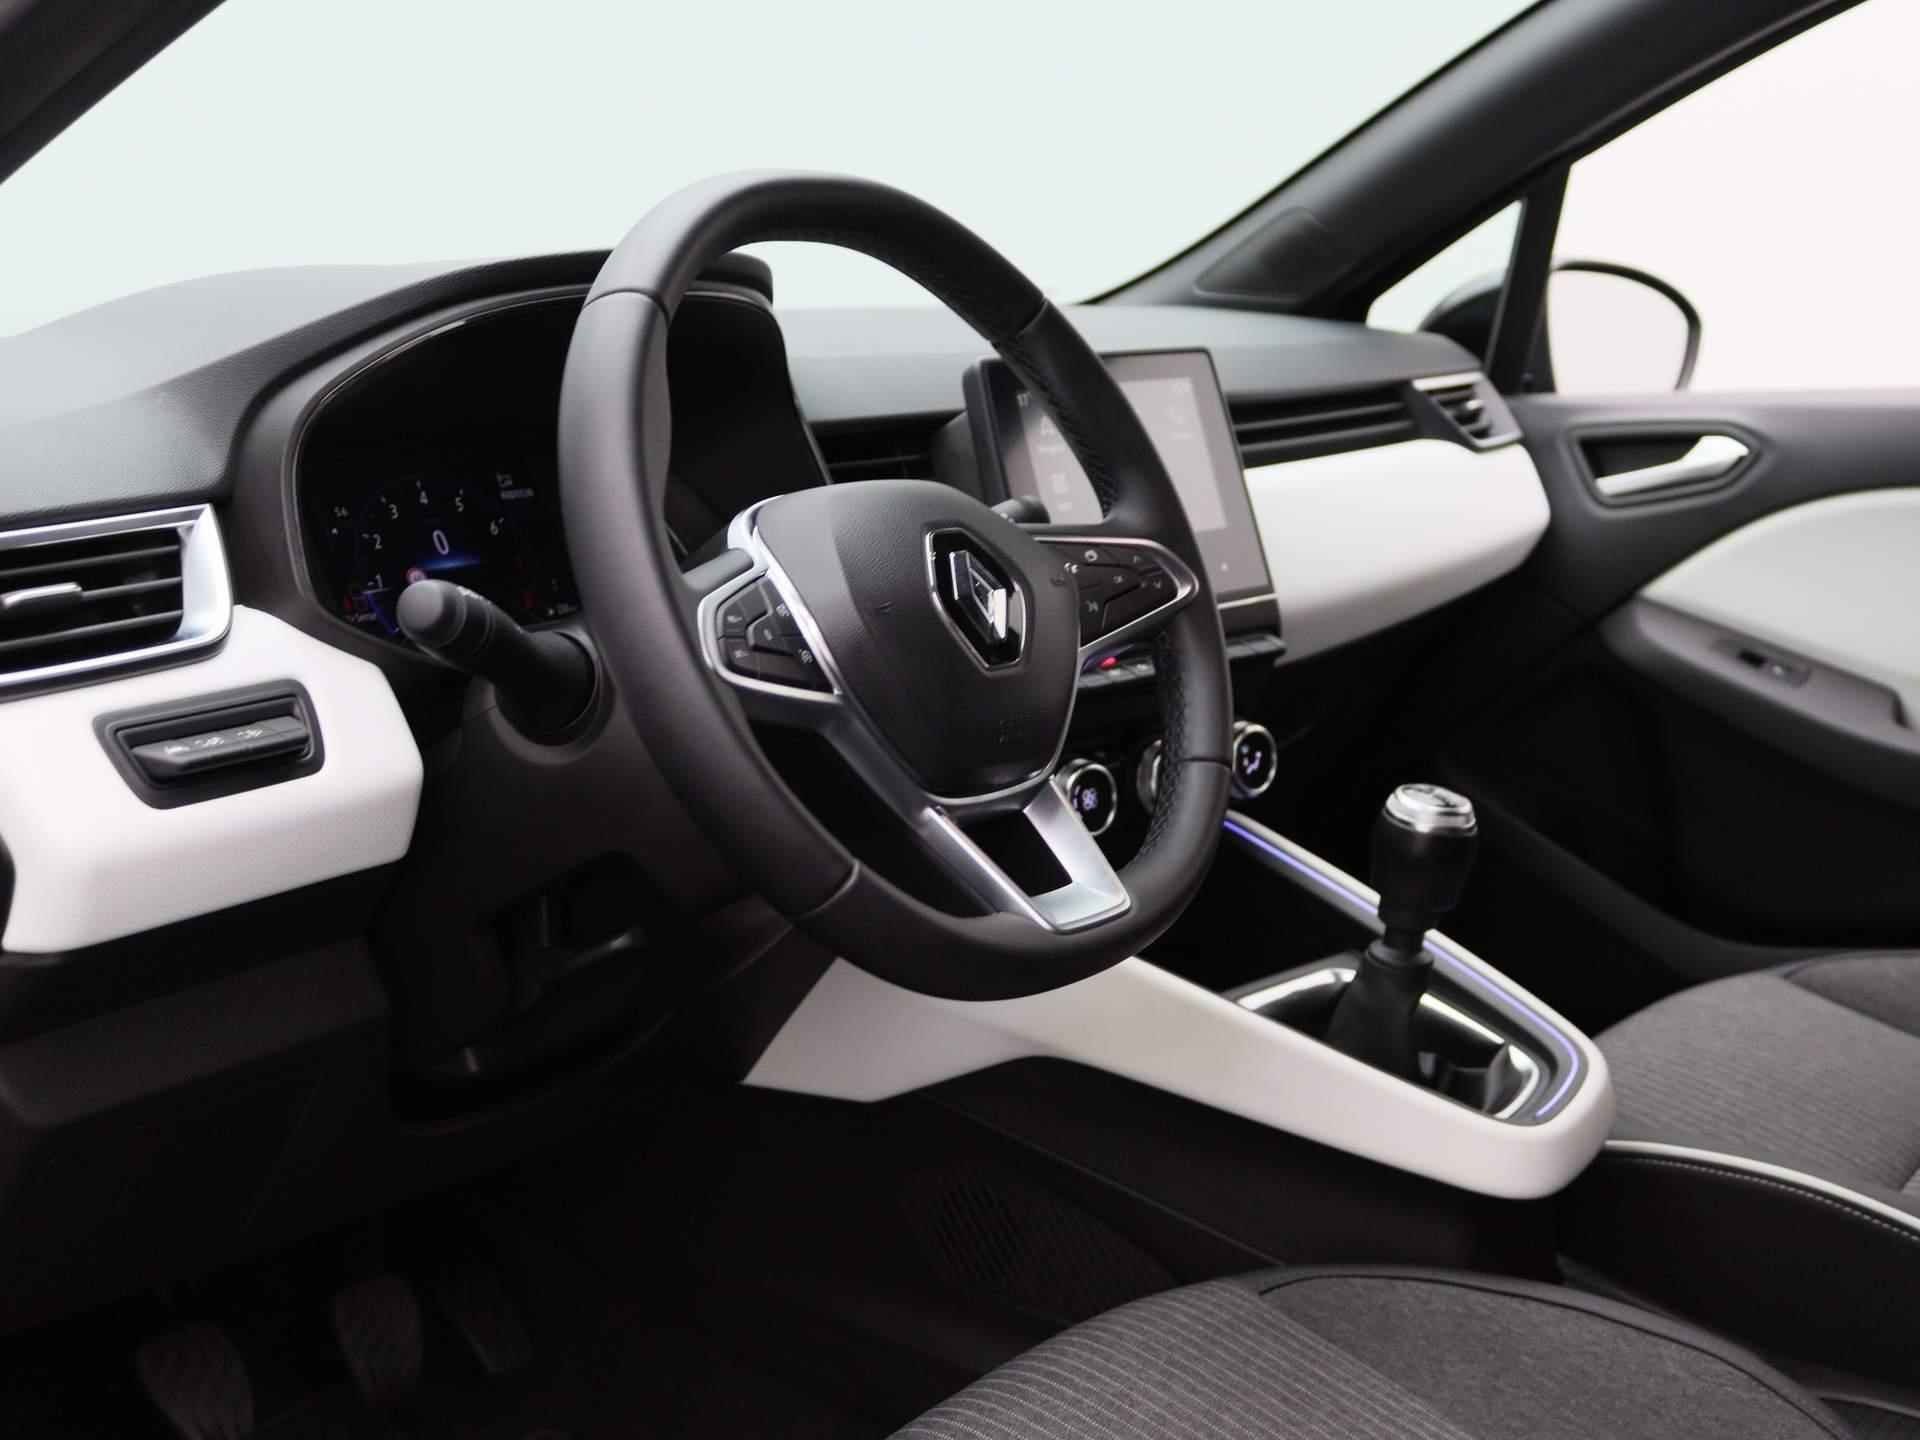 Renault Clio 1.0 TCe 90 Techno | Camera | PDC Voor+Achter | Climate Control | Multi-Sense | Full-Map Navigatie | LED Pure Vision | Privacy Glass | 16" LMV - 33/39